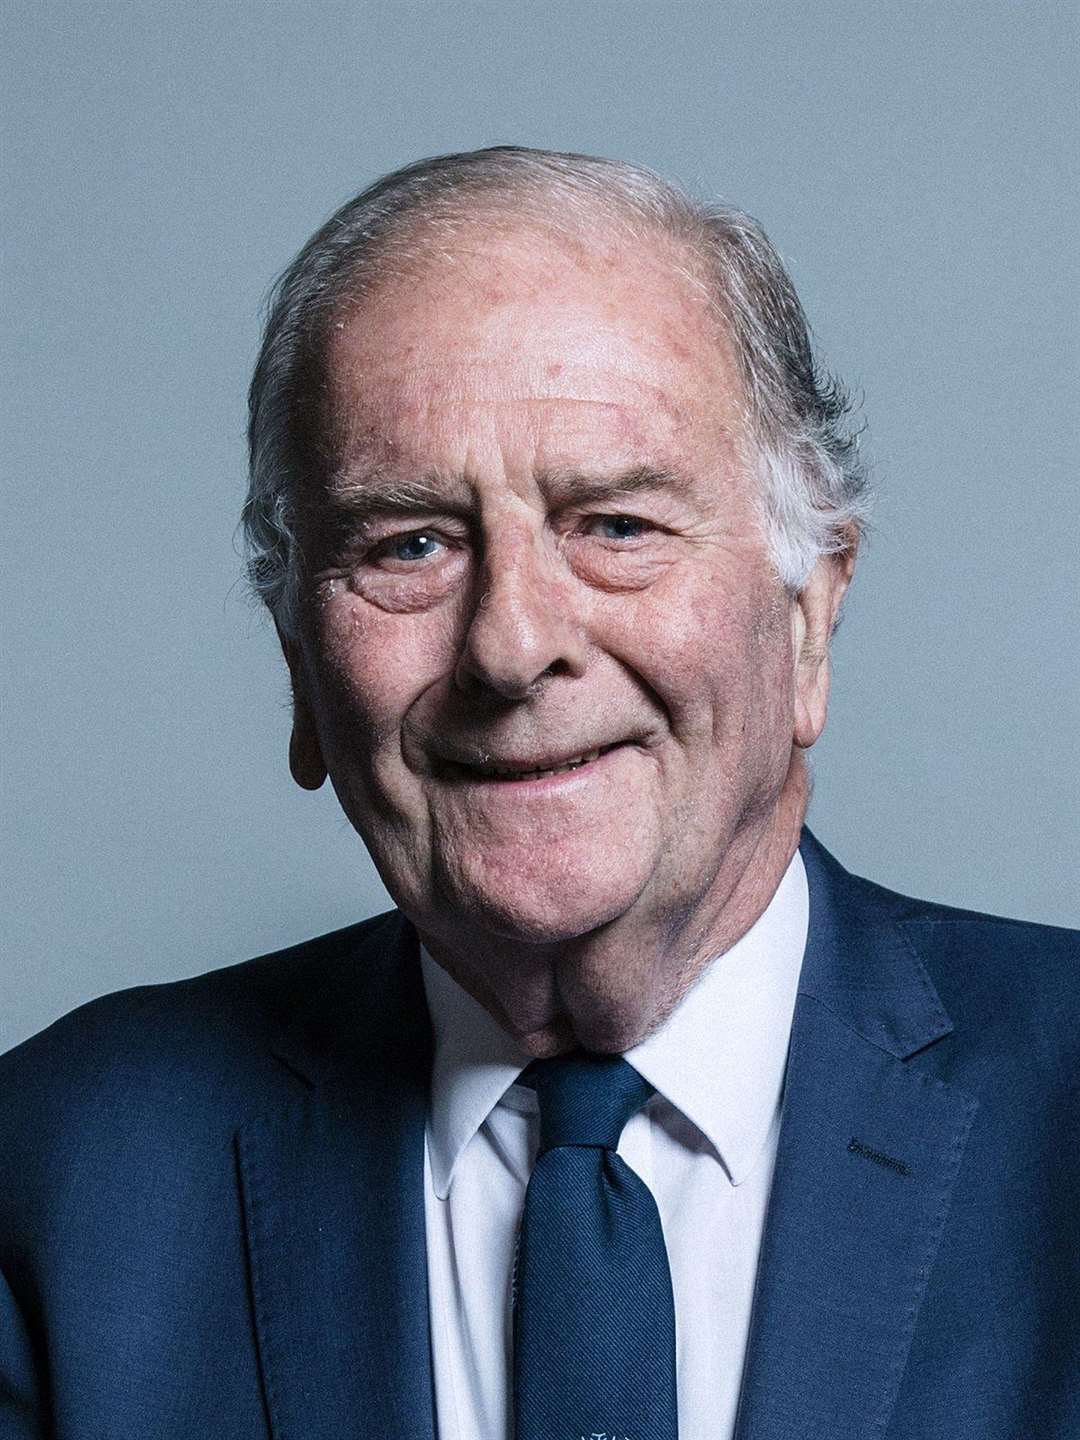 North Thanet MP Sir Roger Gale, whose constituency includes Herne Bay and Margate